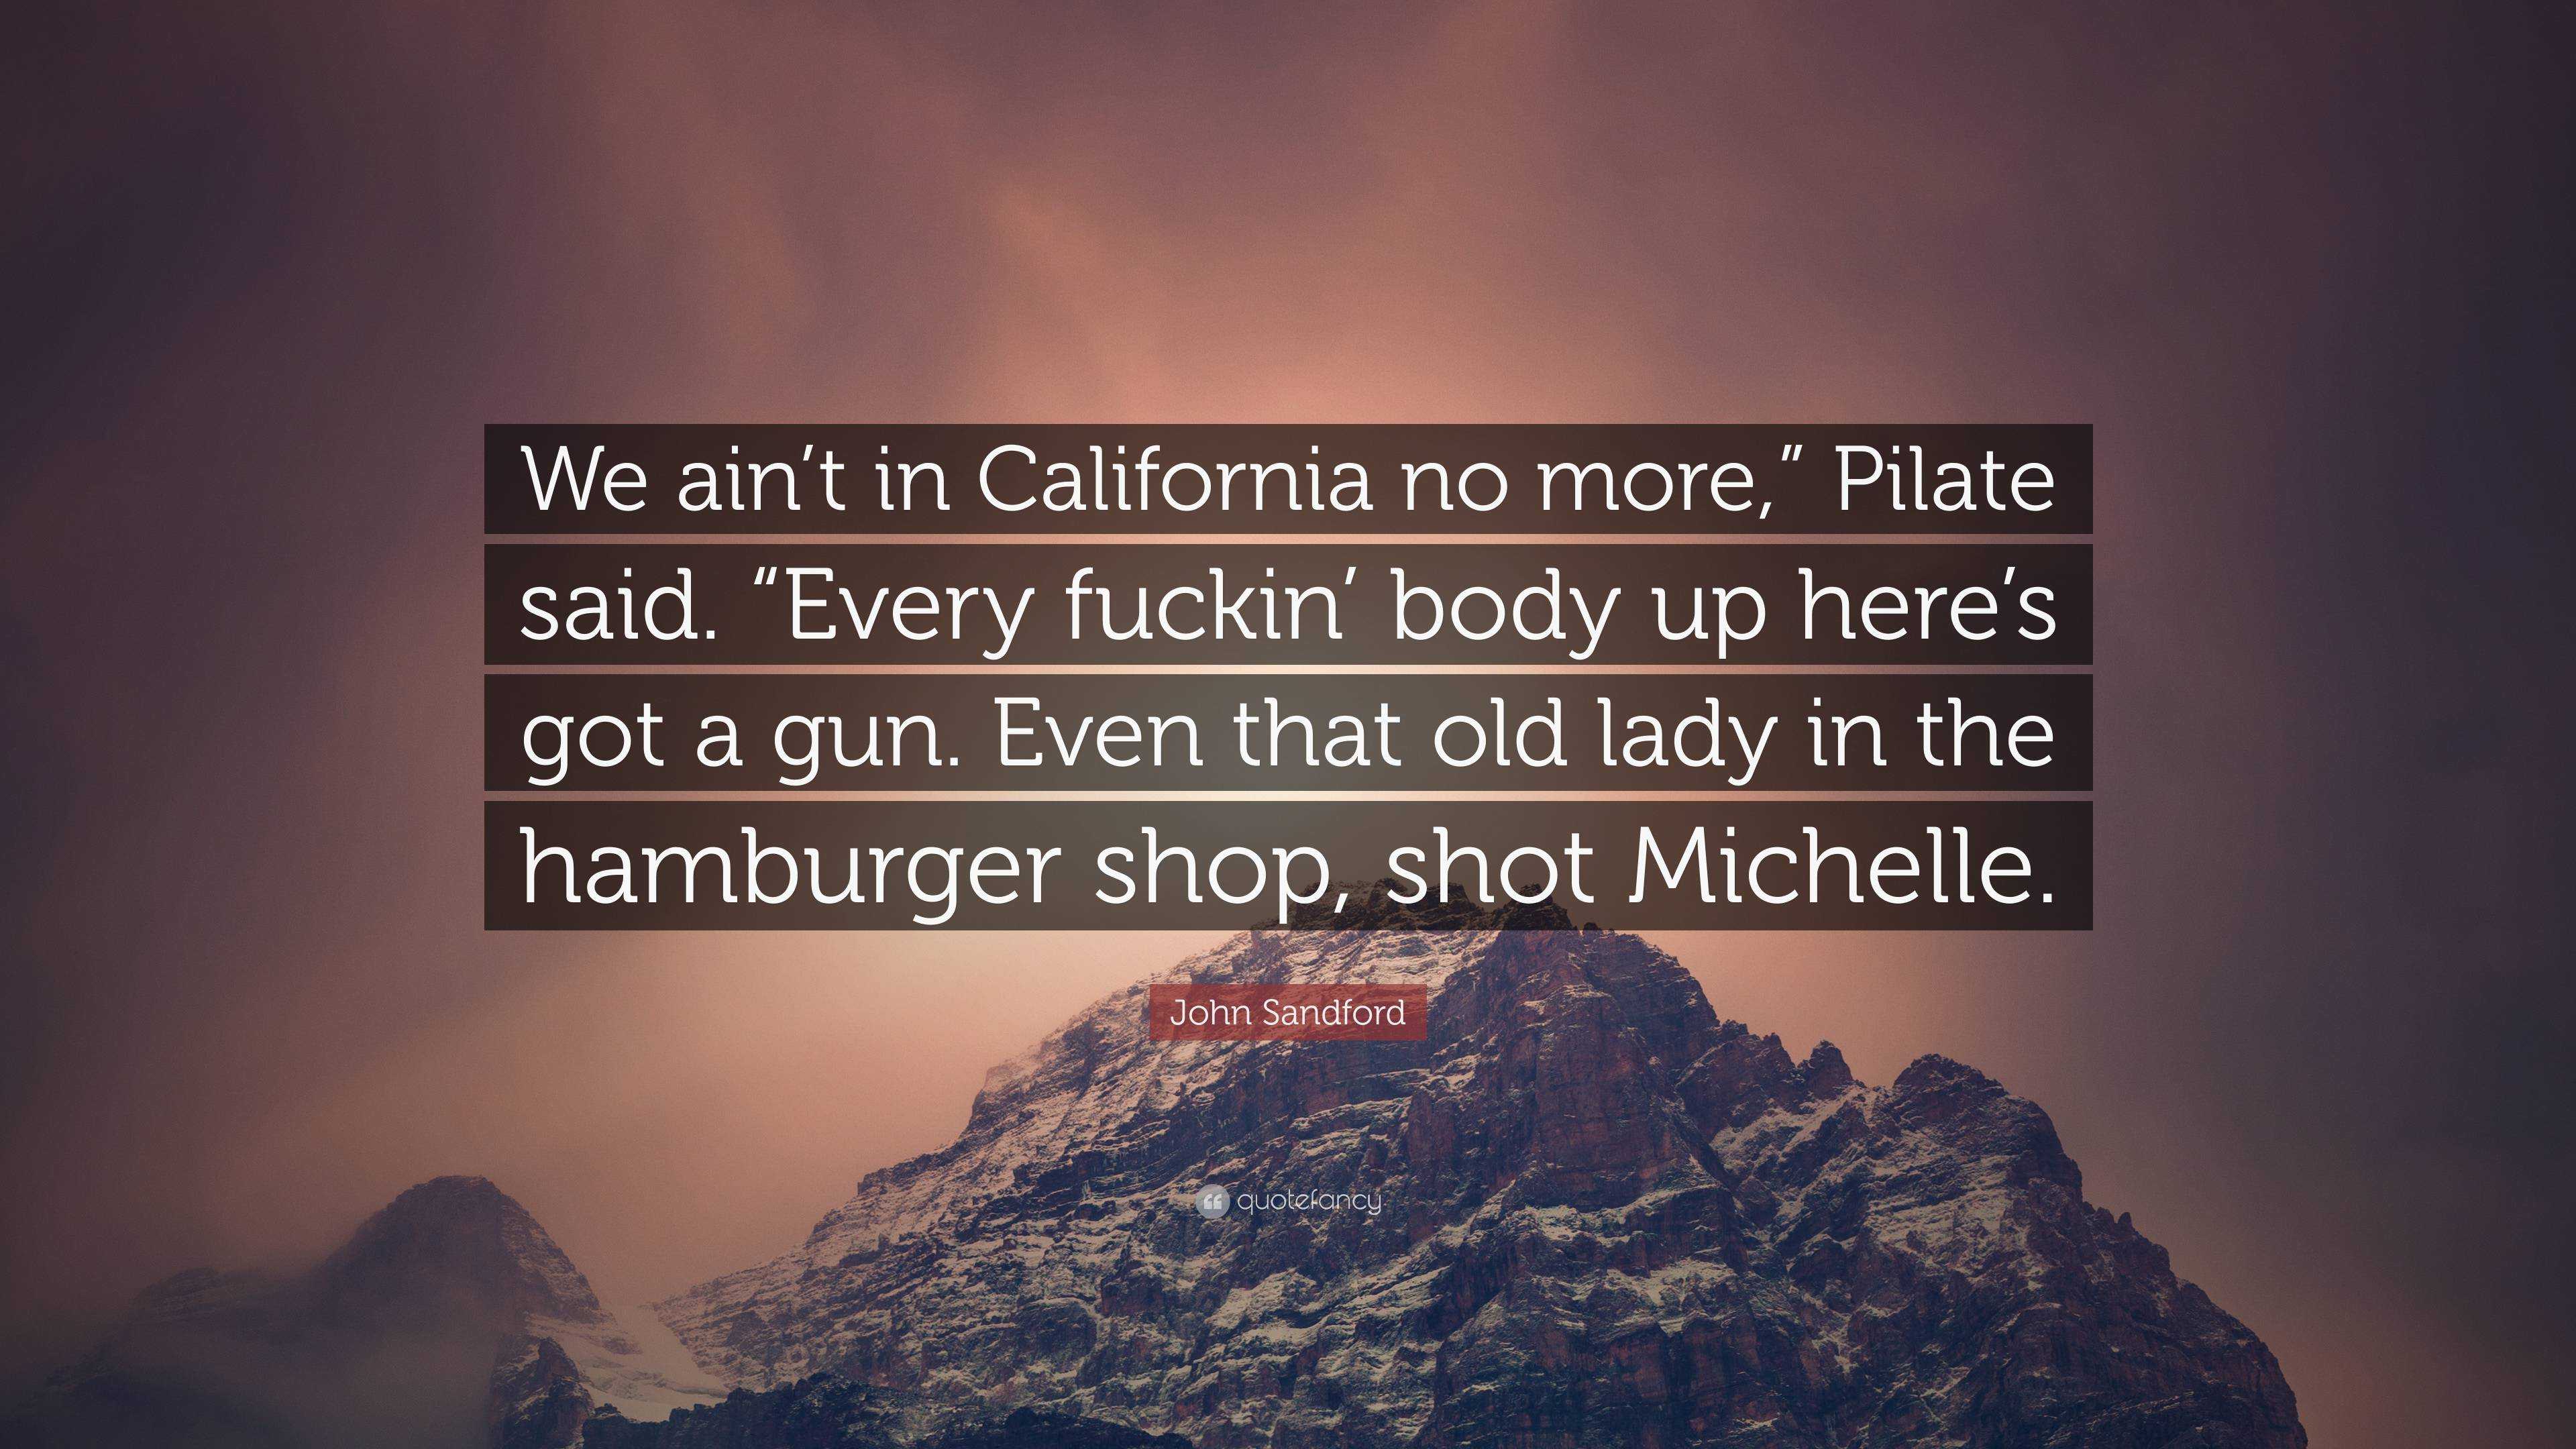 John Sandford Quote: “Call it what you want, a bump stock turns an AR into a